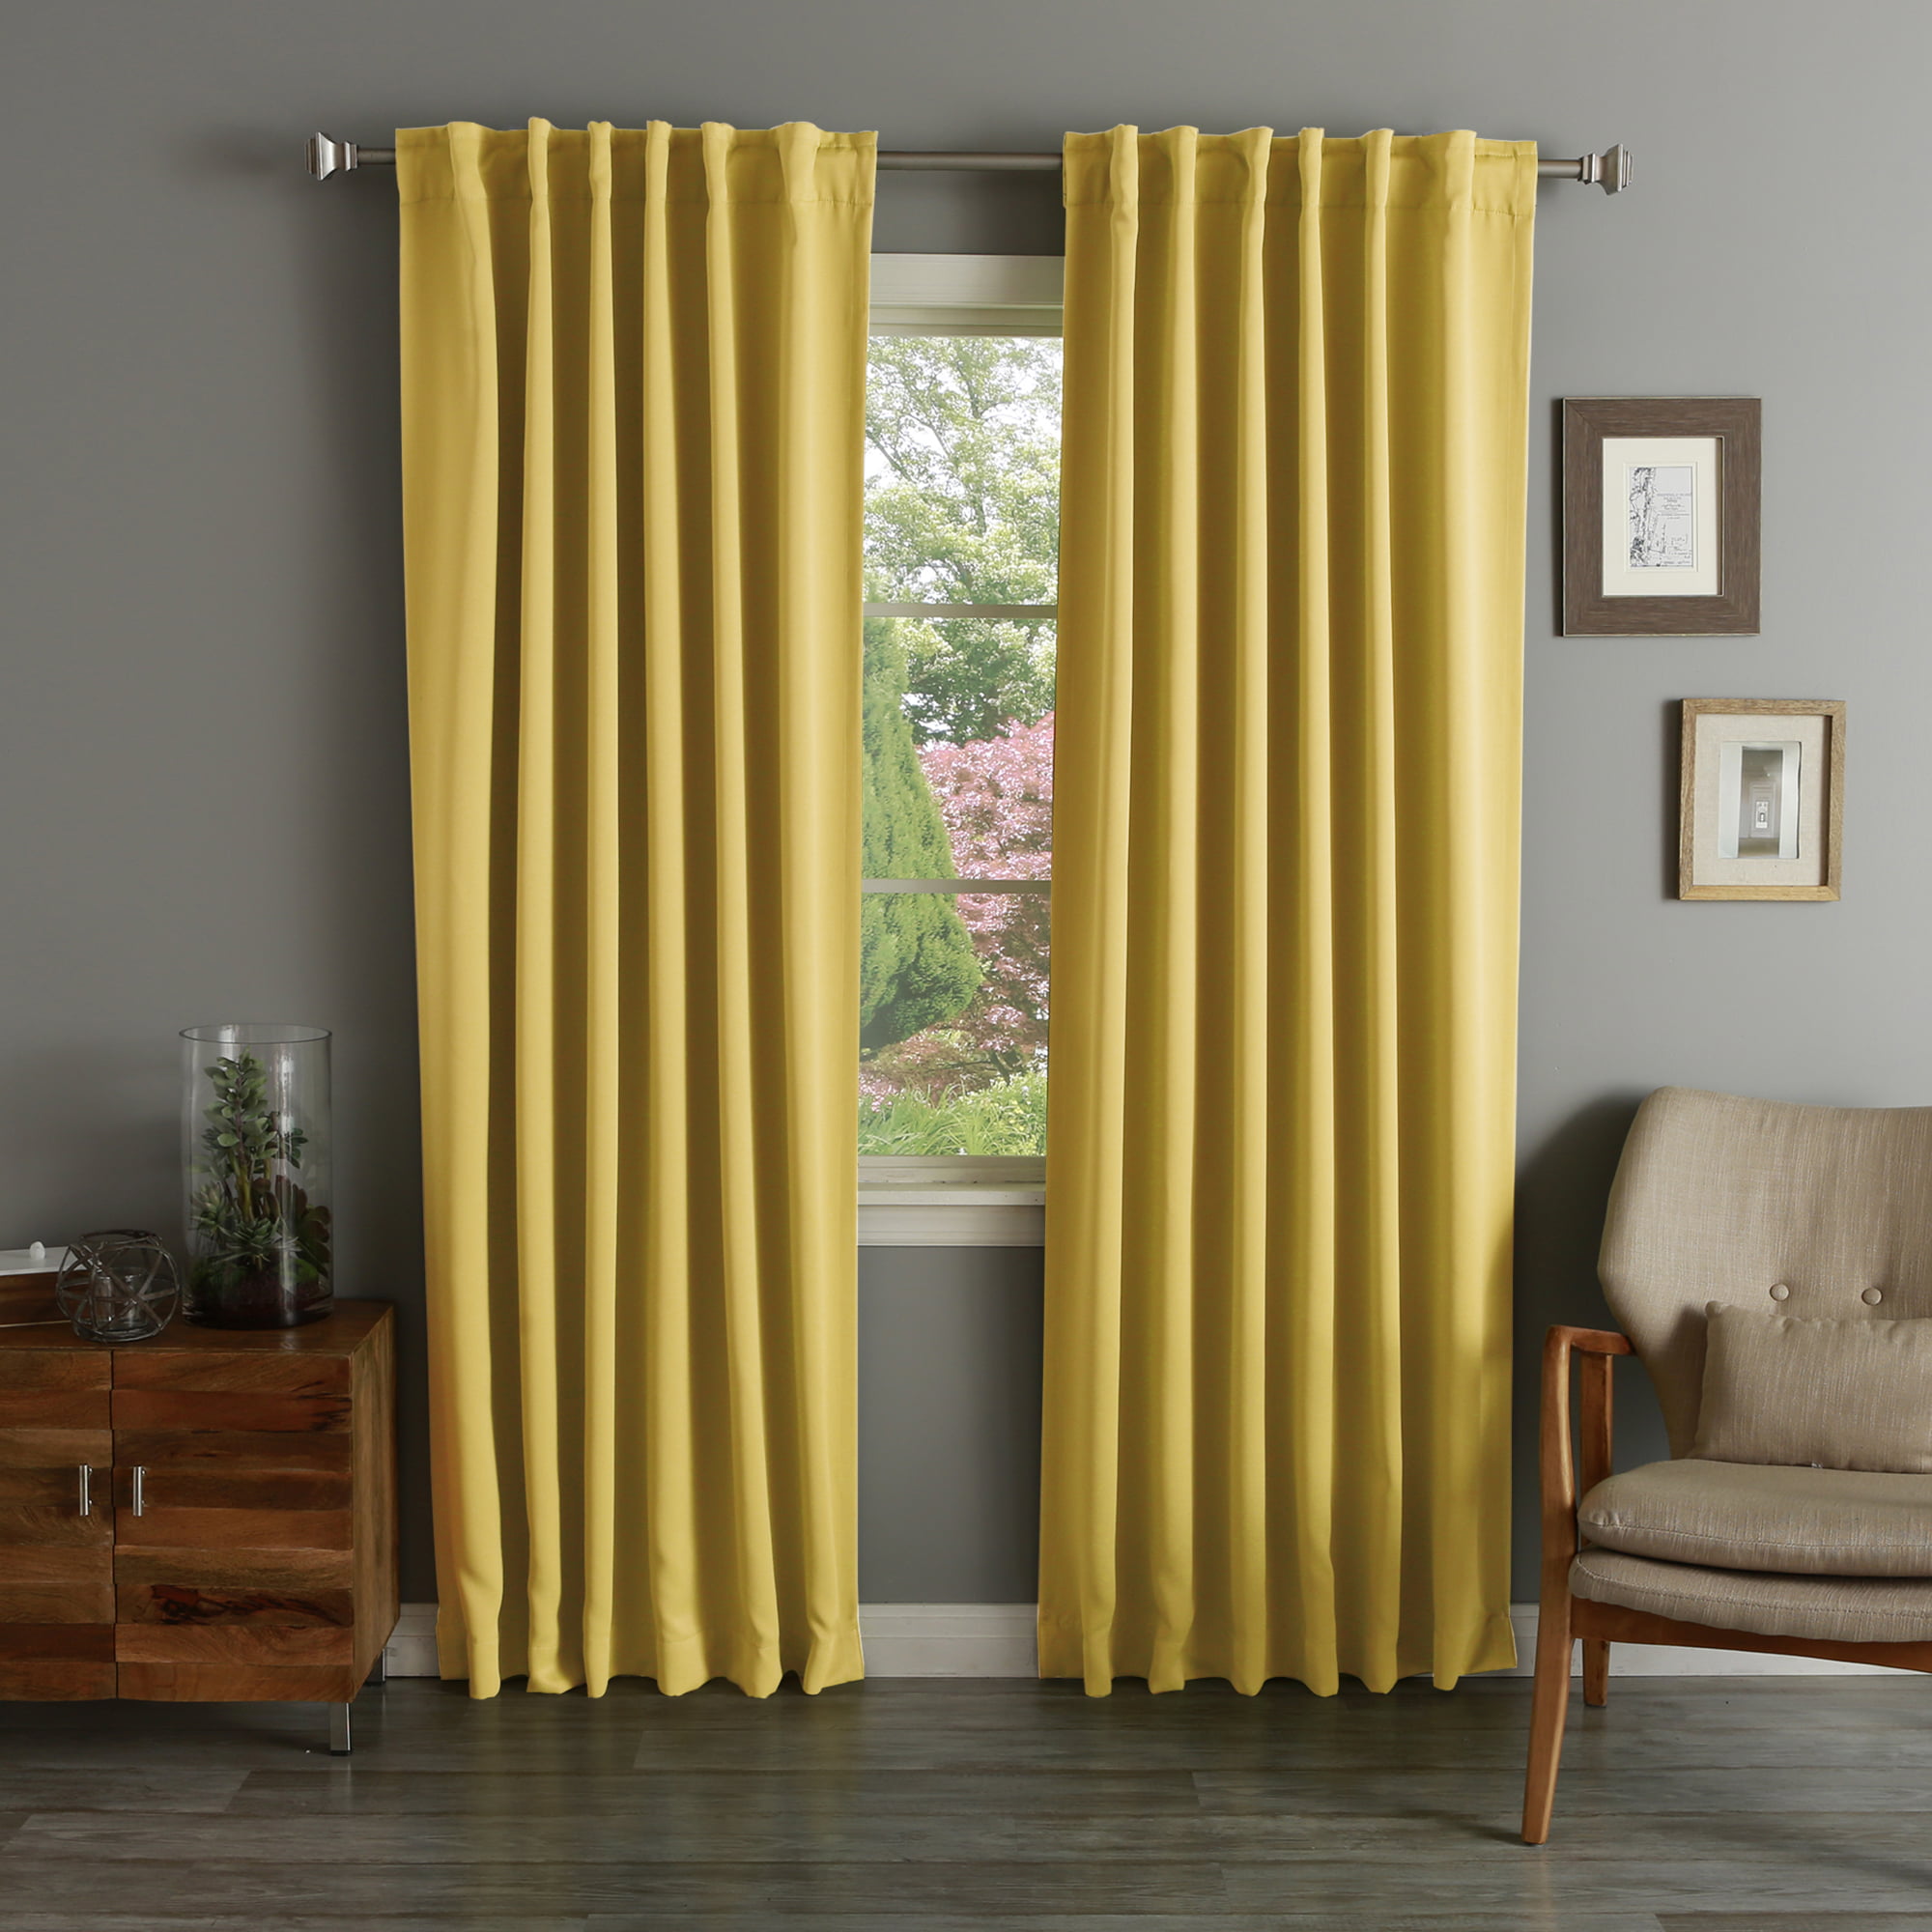 Quality Home Closeout Back Tab Blackout Curtains - Mustard - 52"W x 120